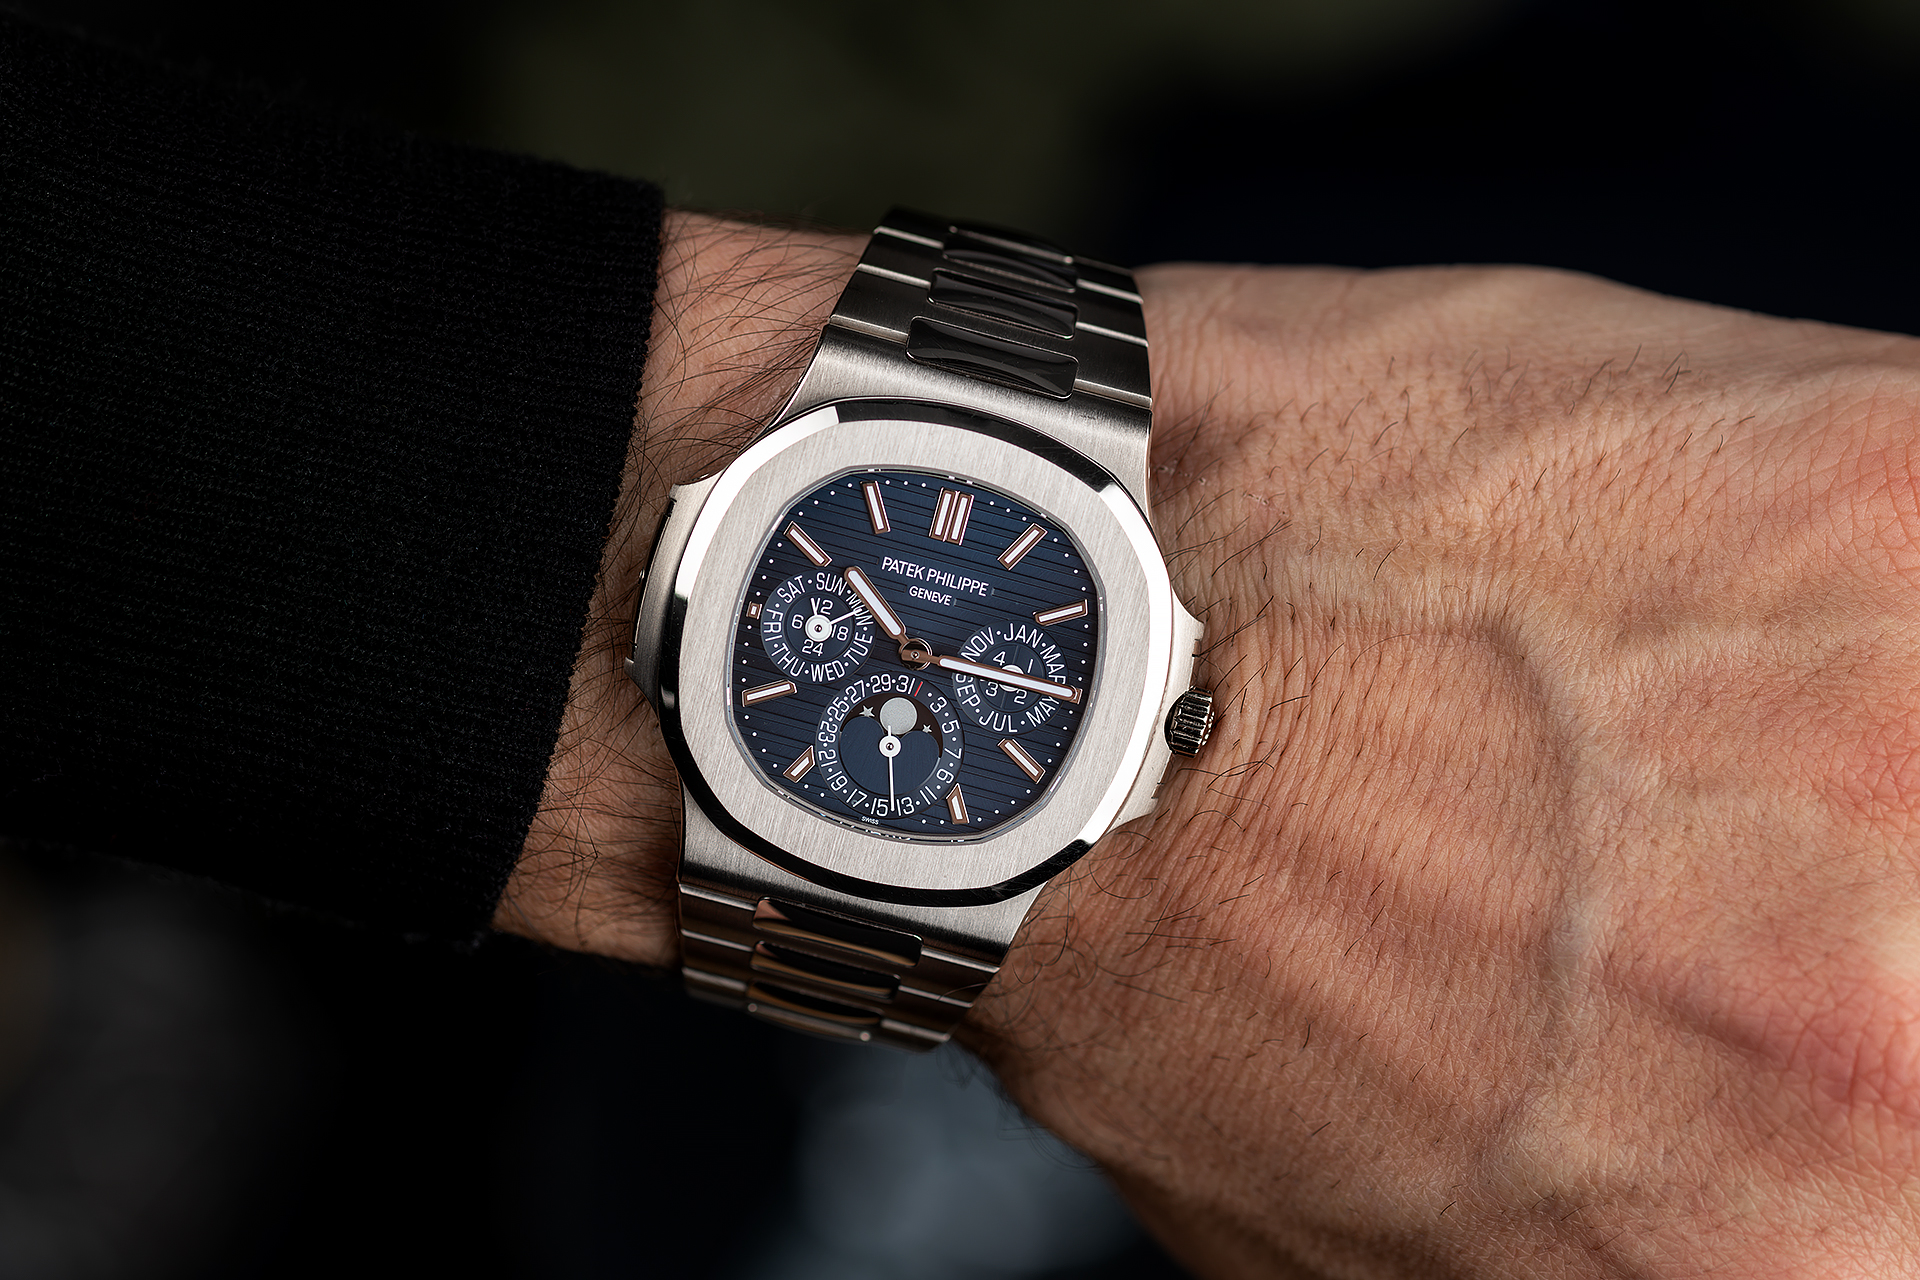 Hands-On With The Patek Philippe Nautilus 5740/1G